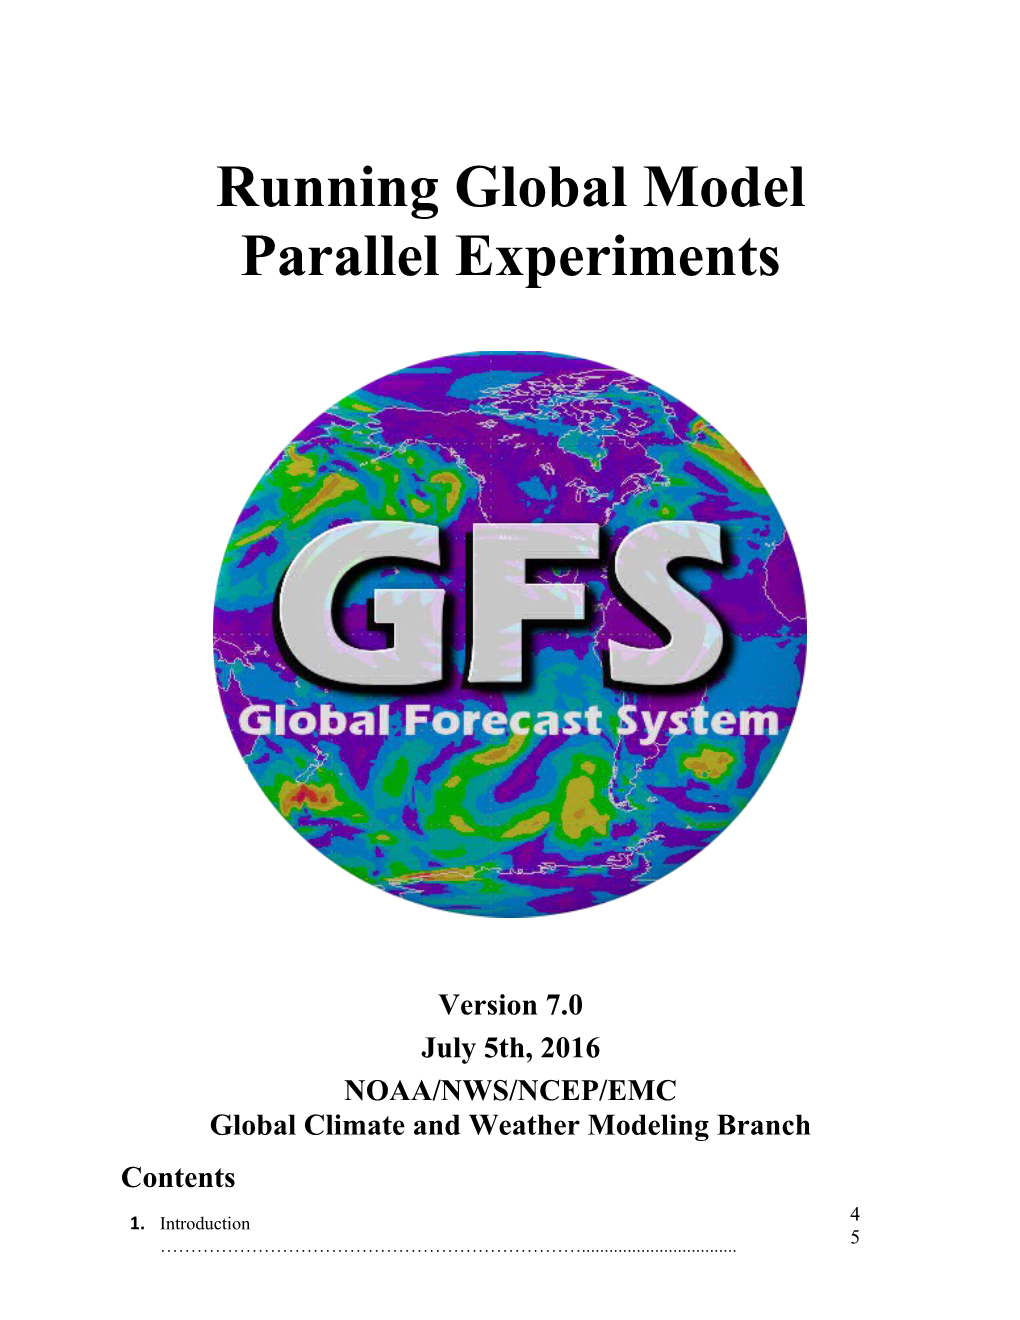 Running Global Model Parallel Experiments s1